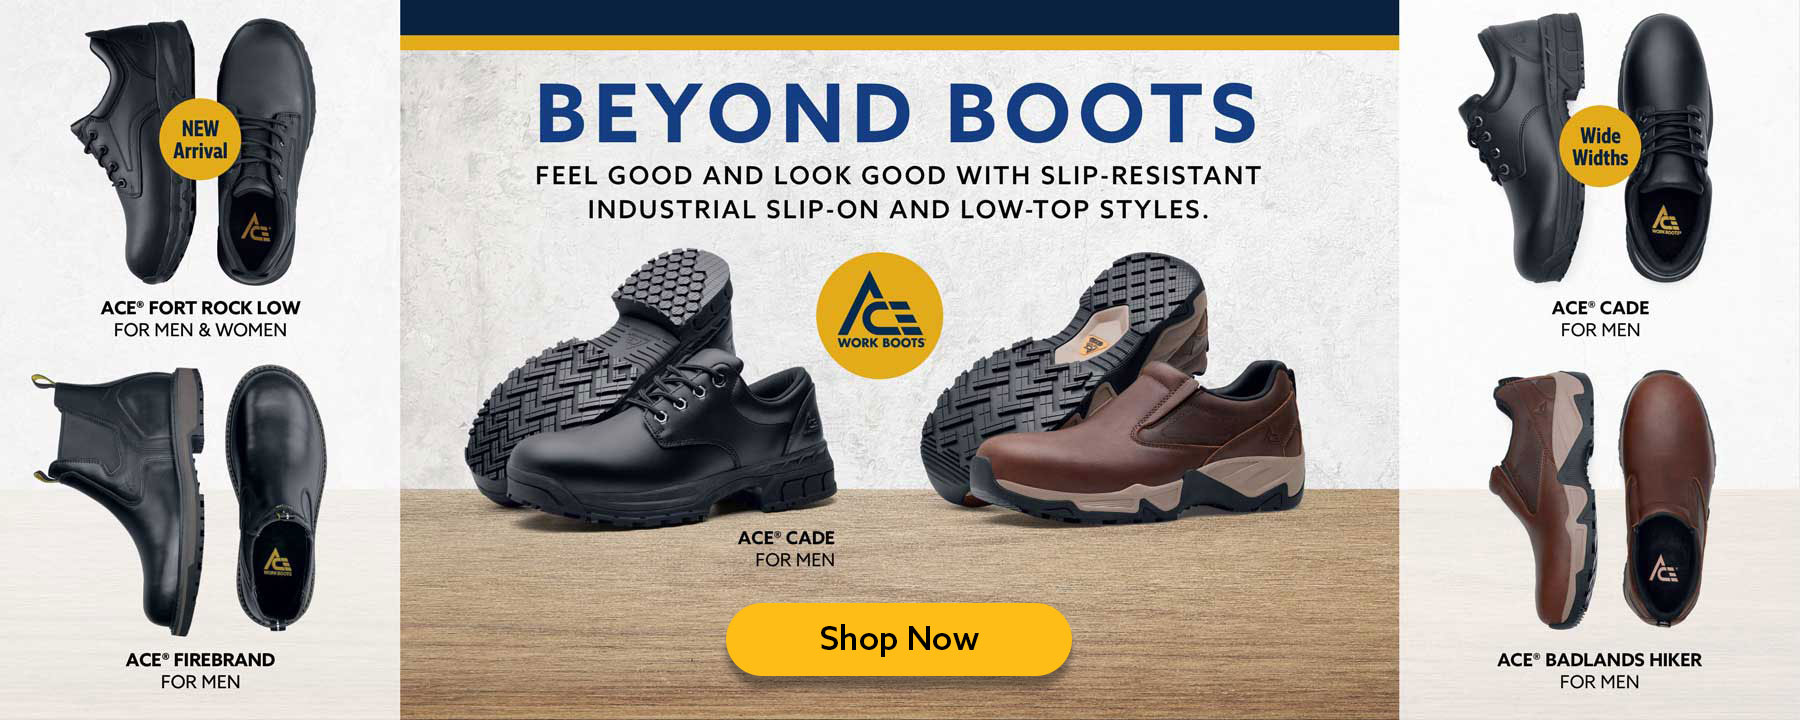 Beyond boots, shop now!